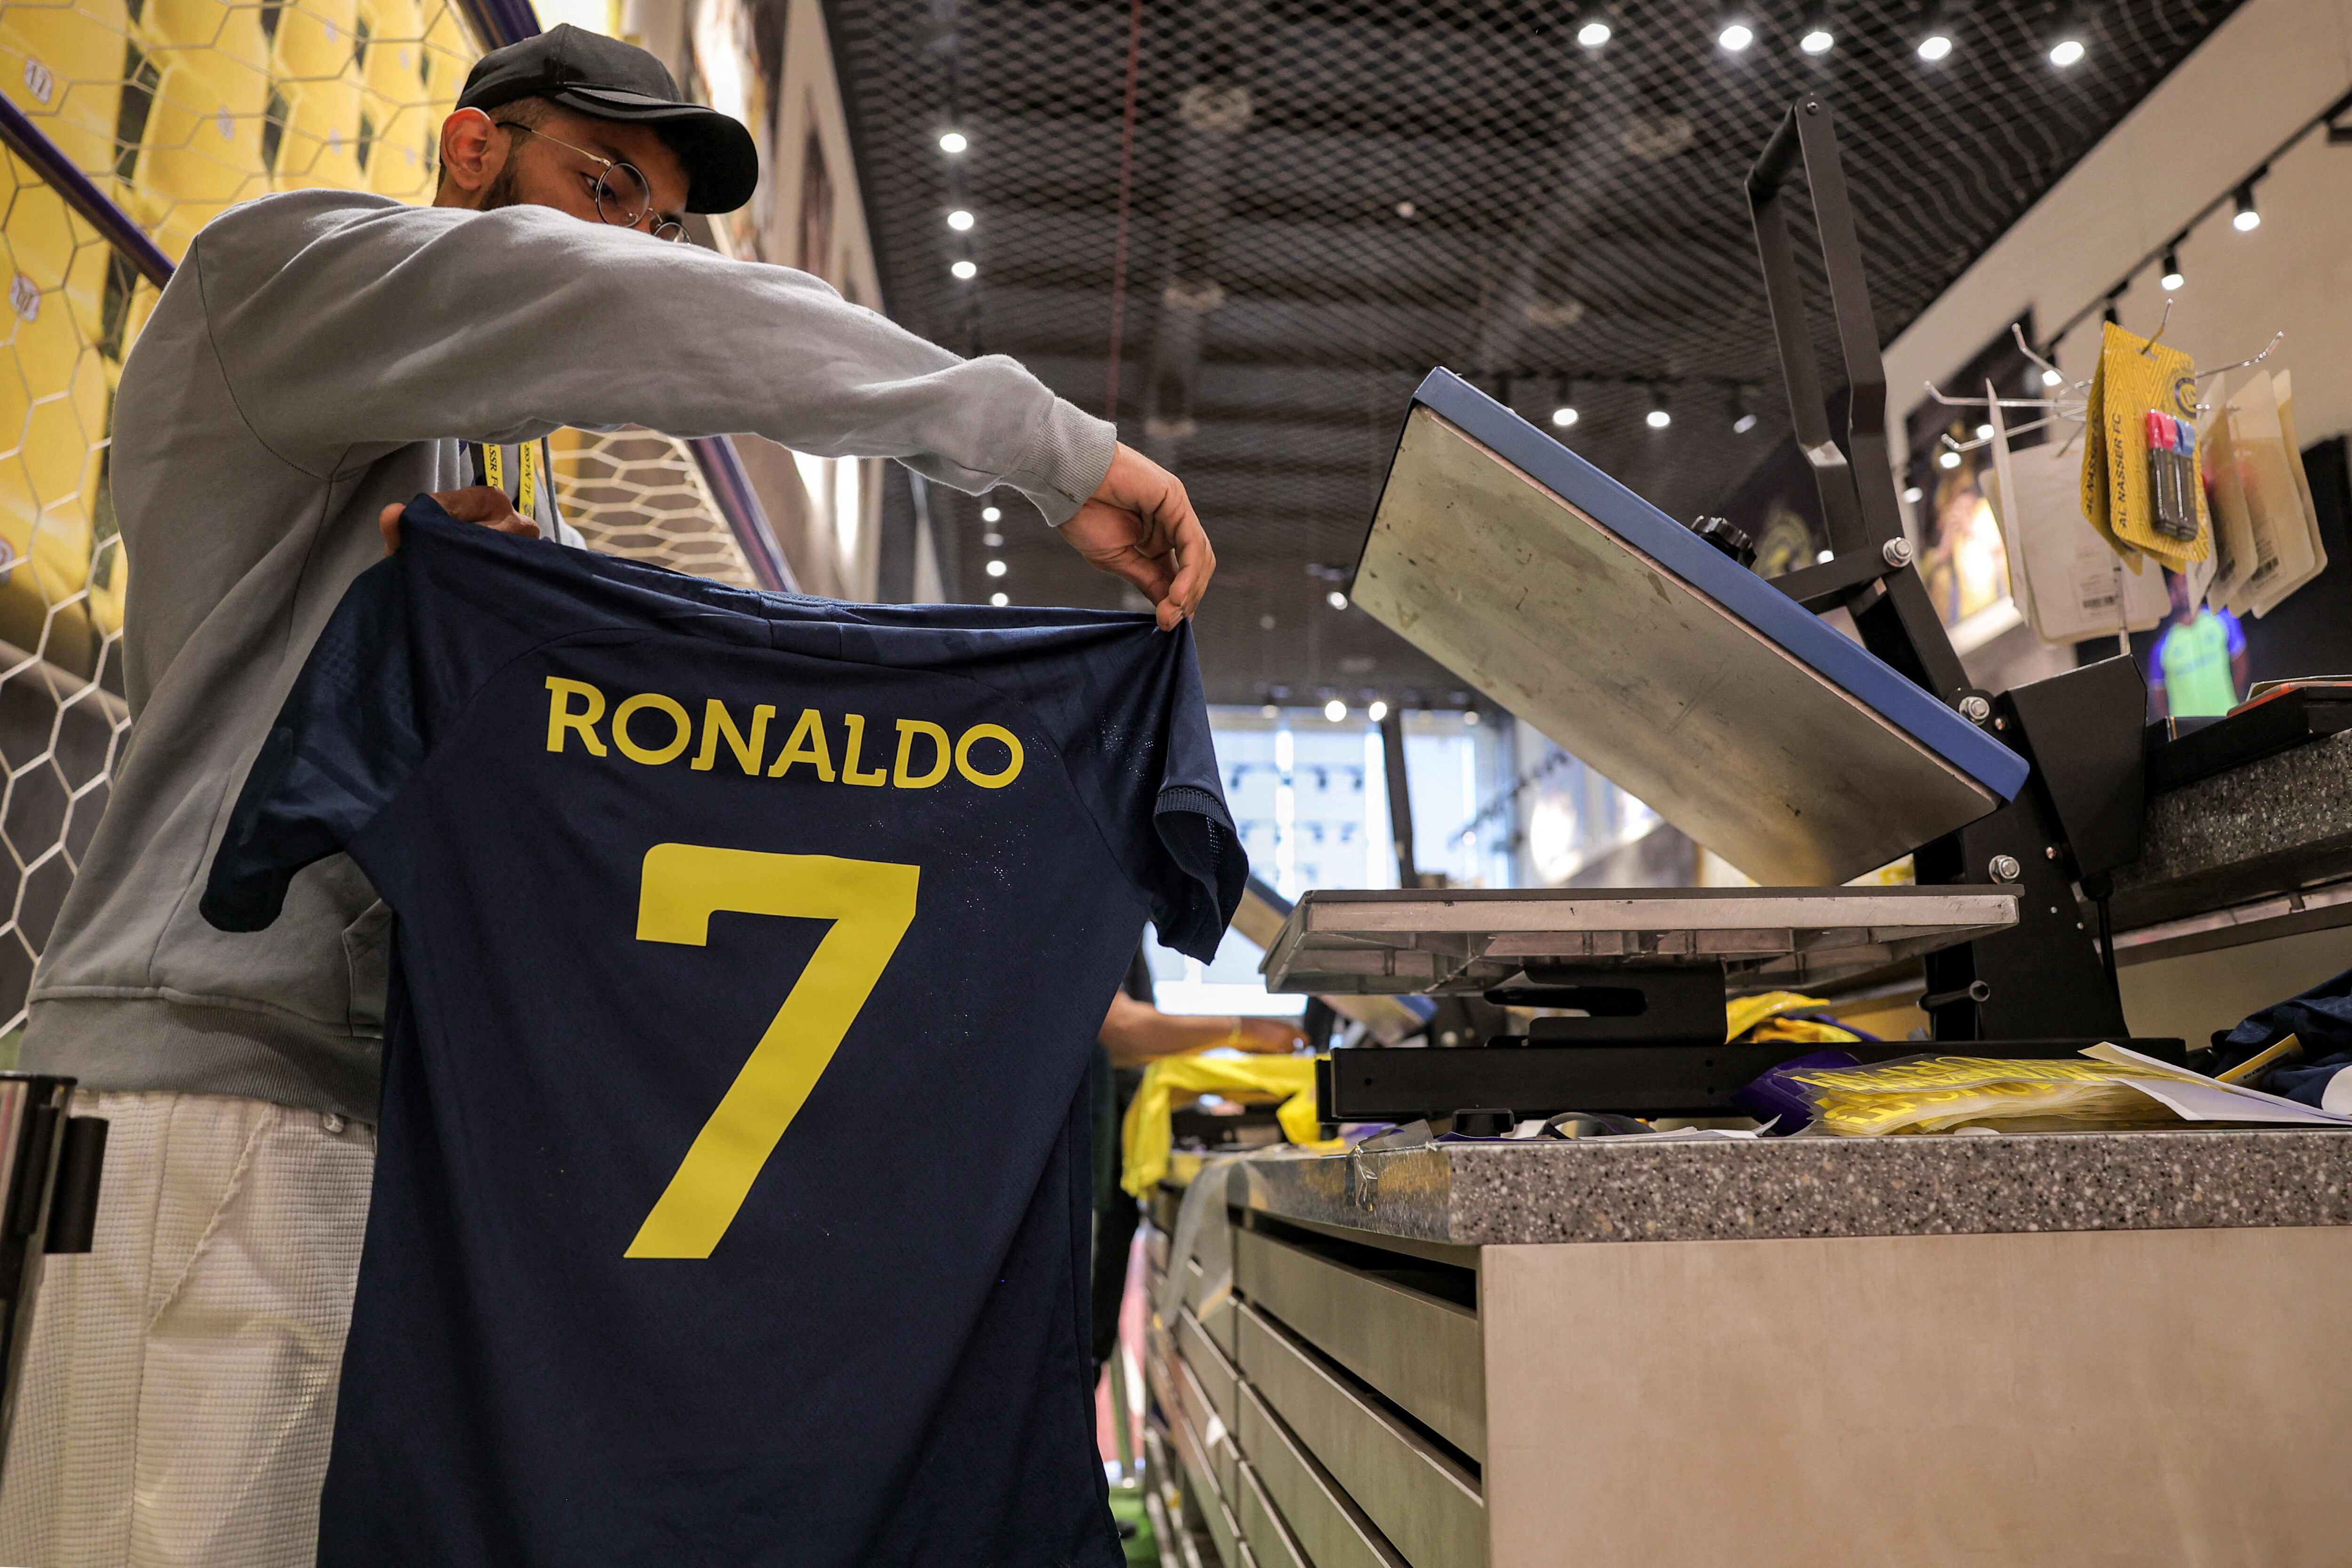 Cristiano Ronaldo Al-Nassr jersey: Where can I buy it and what is